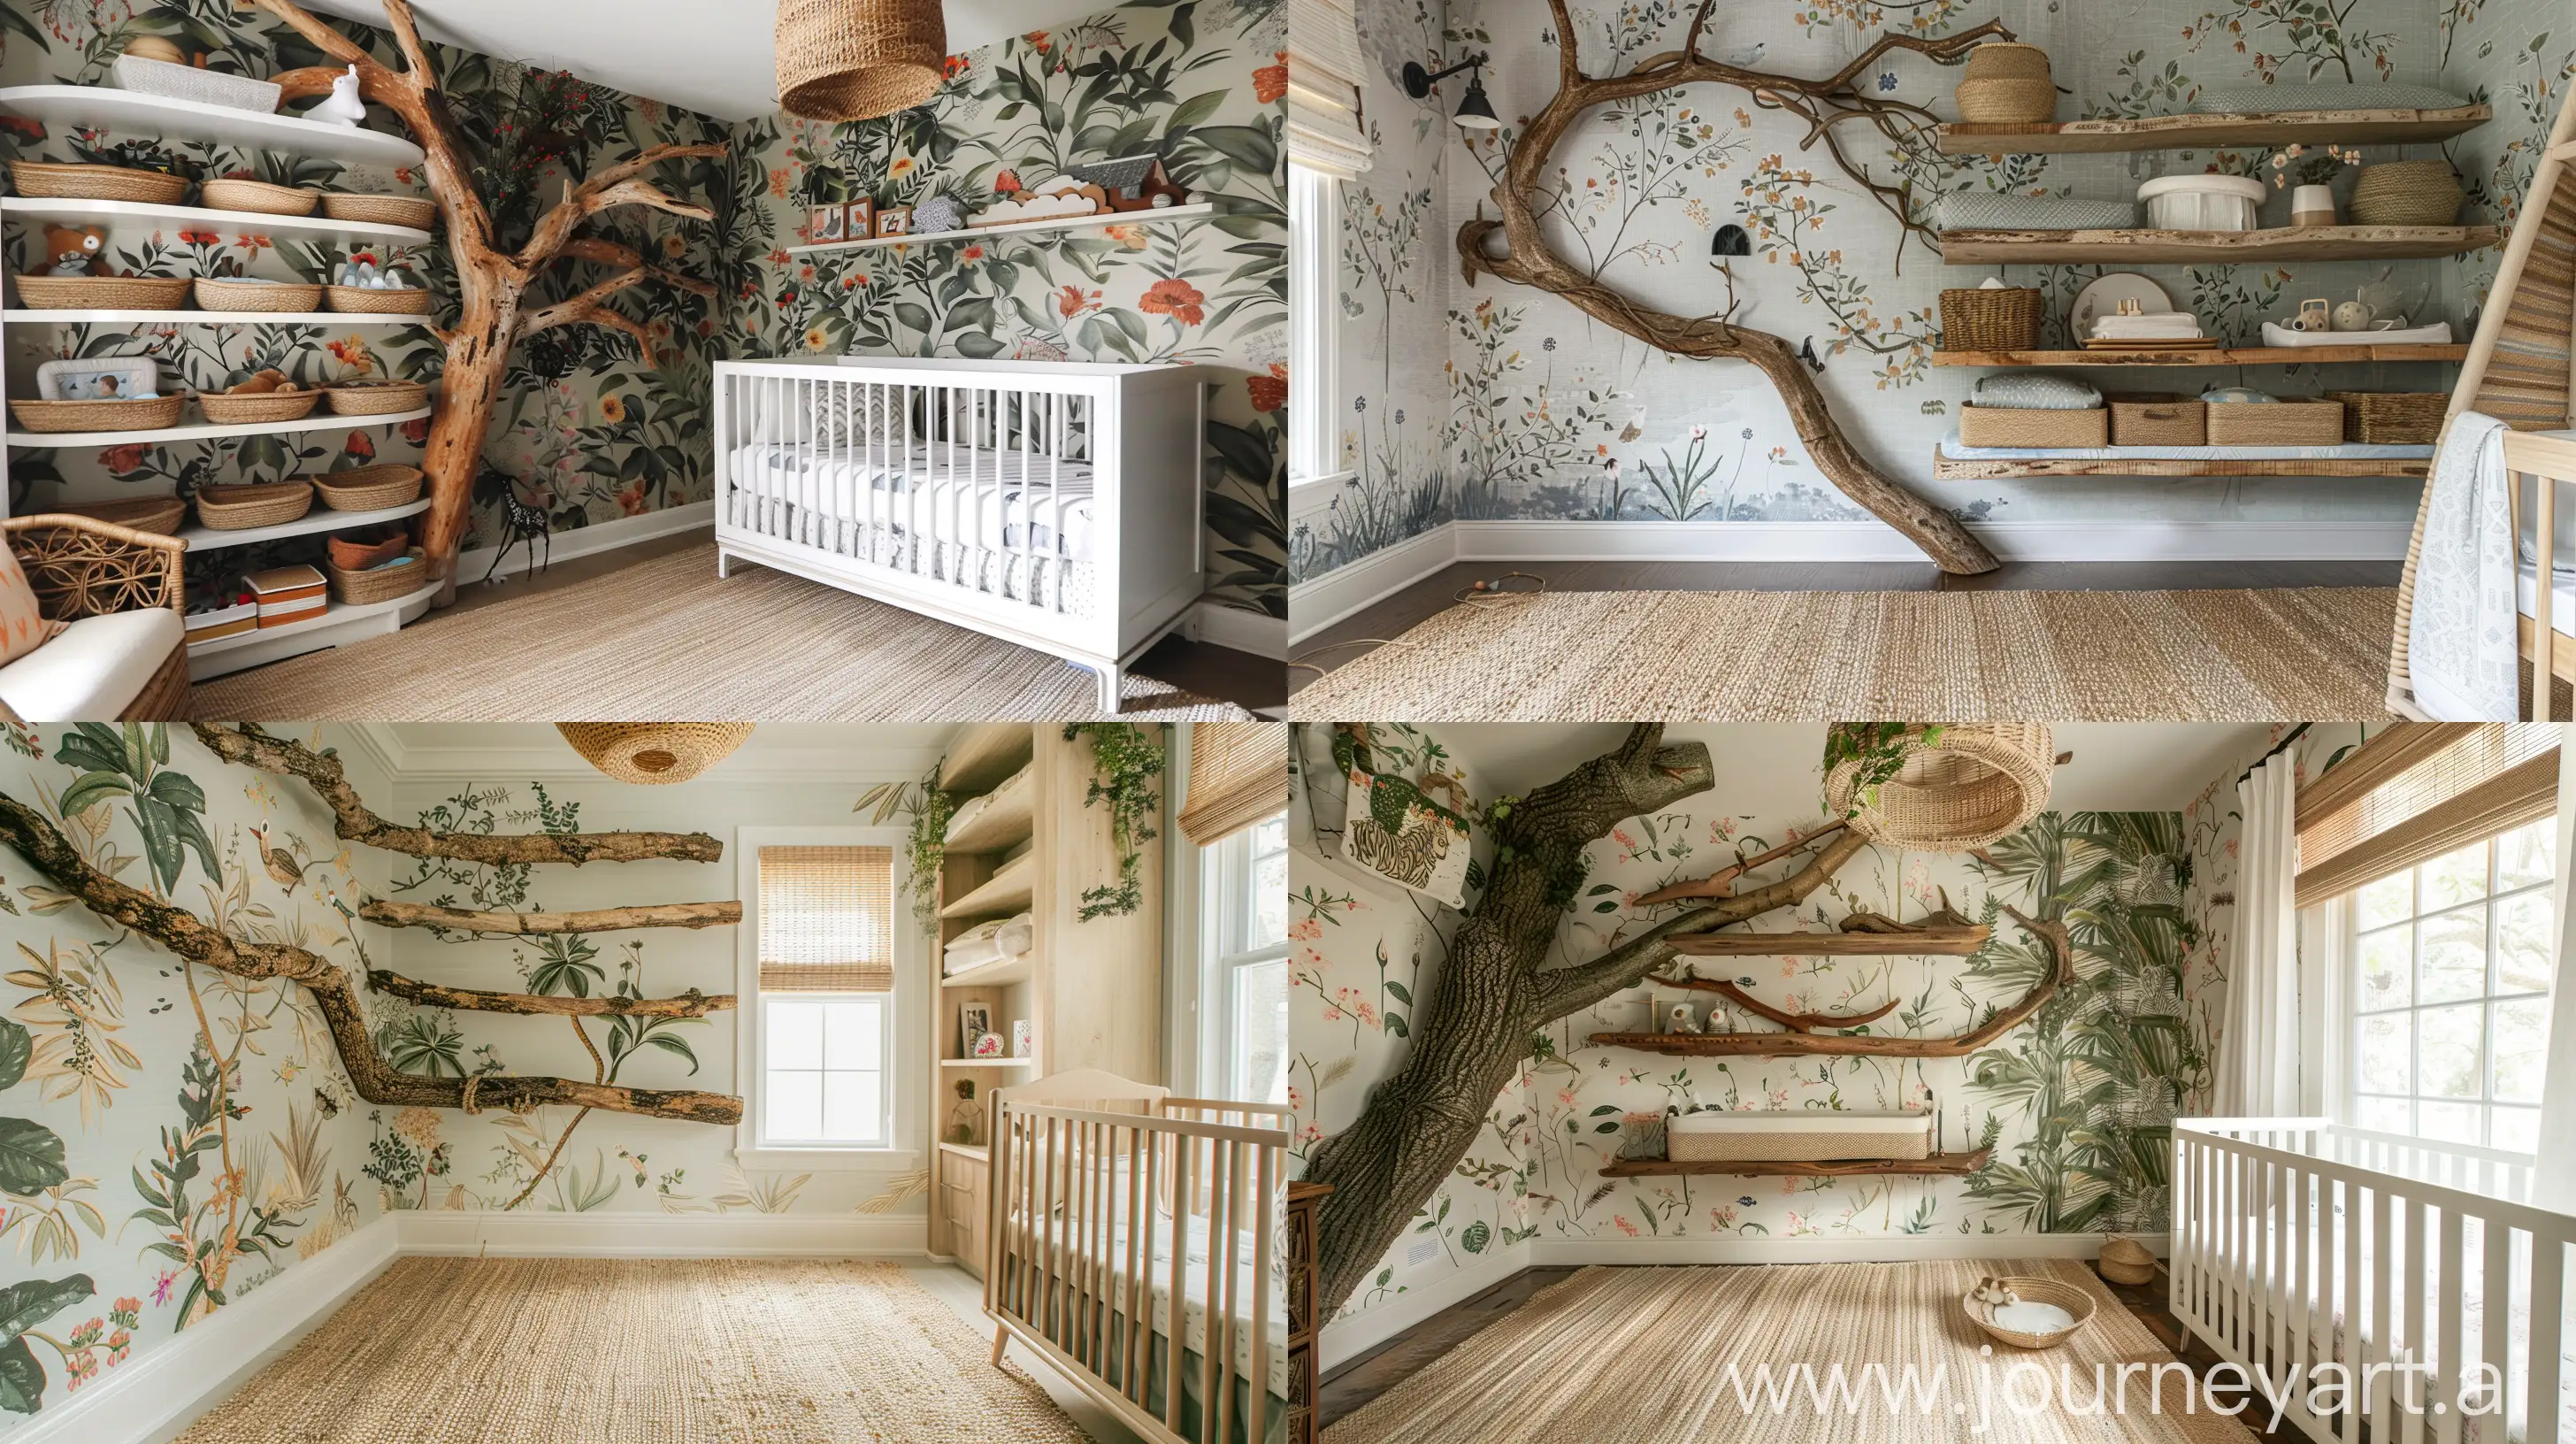 Nature-Inspired Haven: Nursery Room with Tree Branch Shelving, Botanical Wallpaper, and Woven Seagrass Rug --ar 16:9